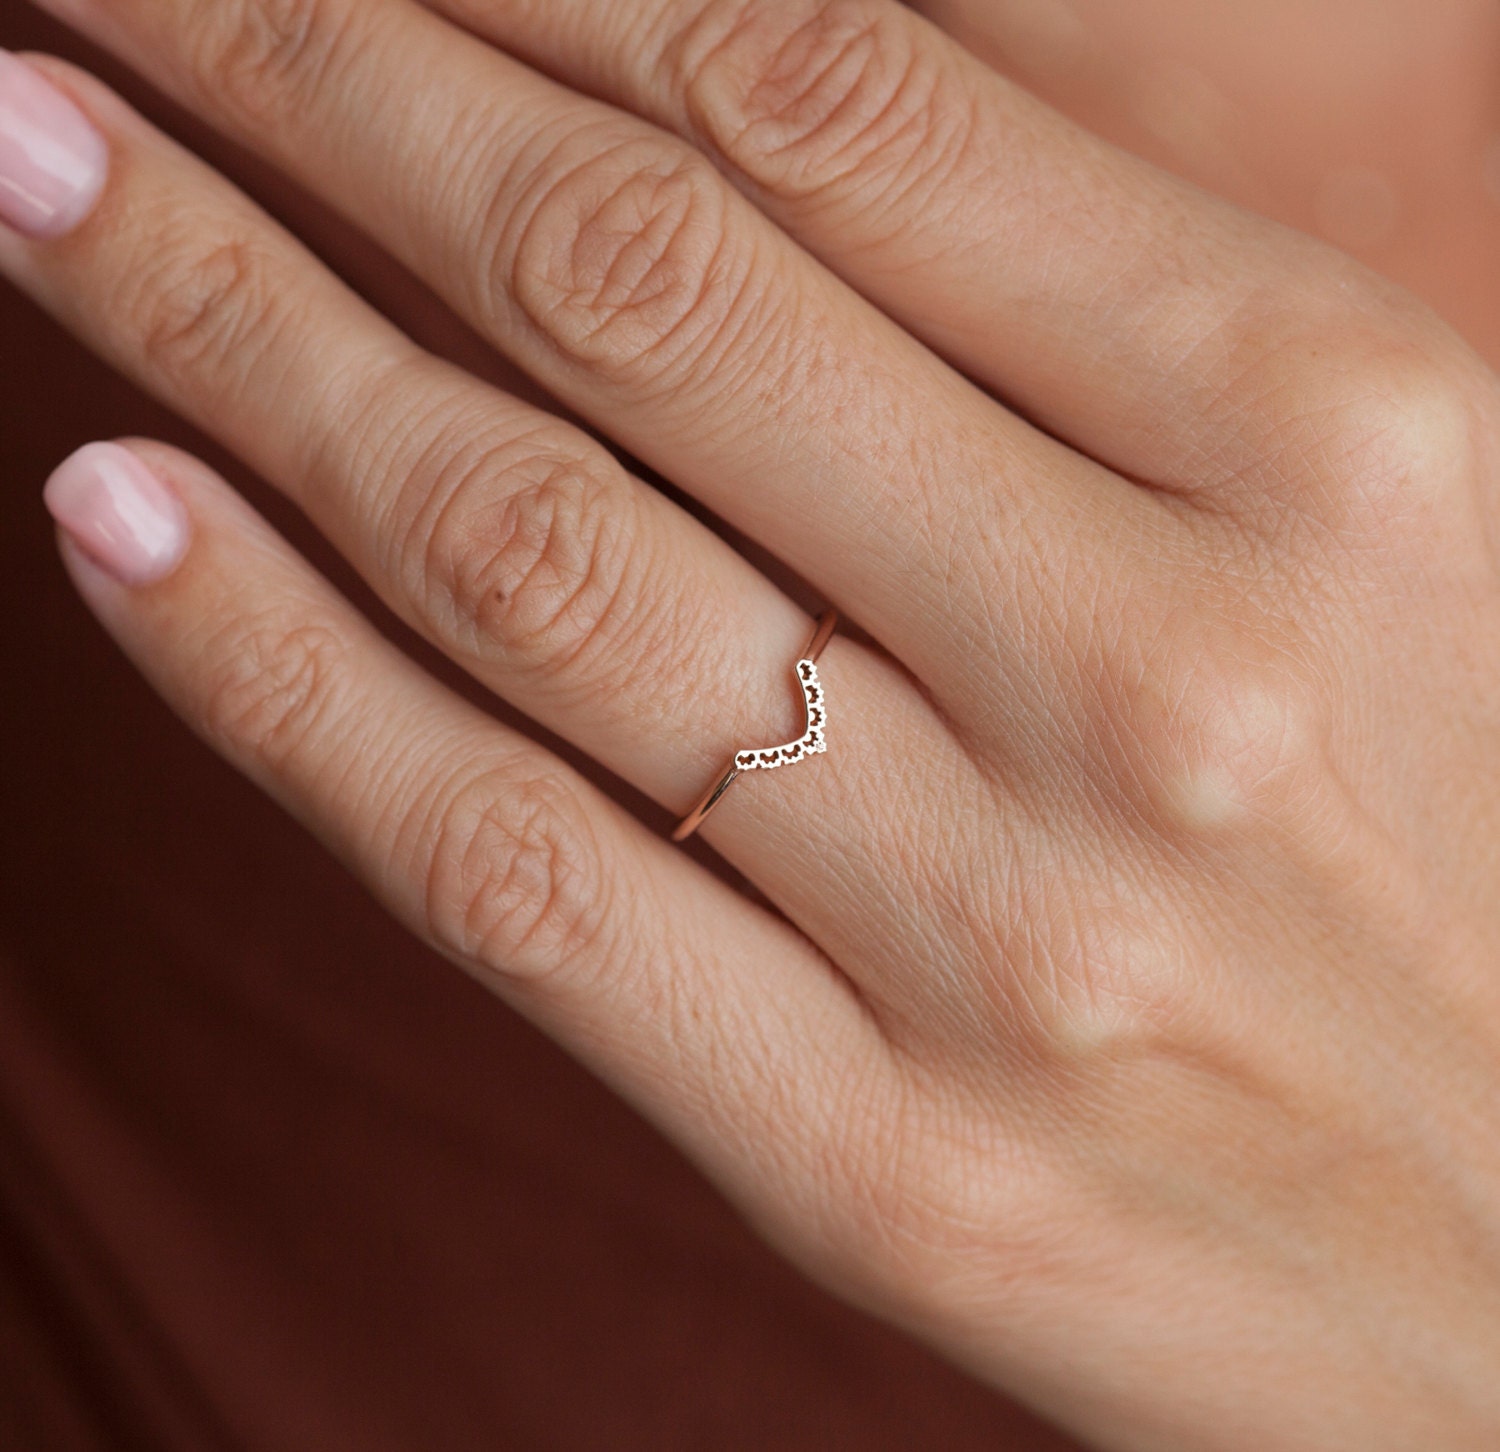 Delicate Rose Gold Wedding Band, Lace Ring V Shaped, Stacking Wedding Ring In